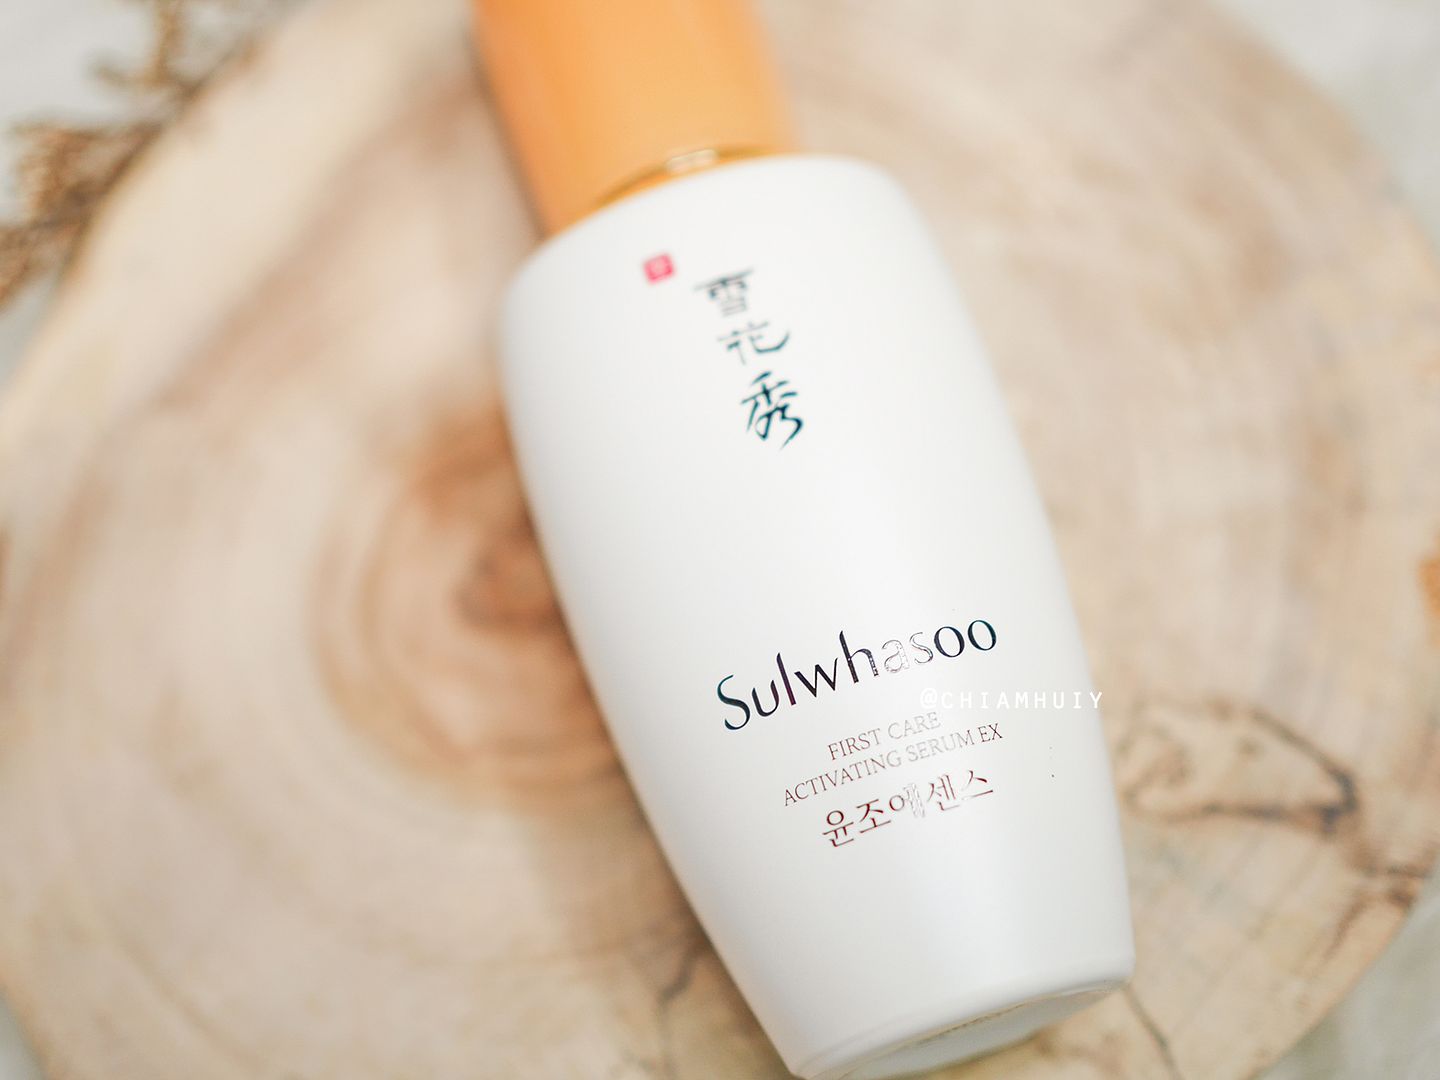  photo sulwhasoo first care activating serum_0.jpg